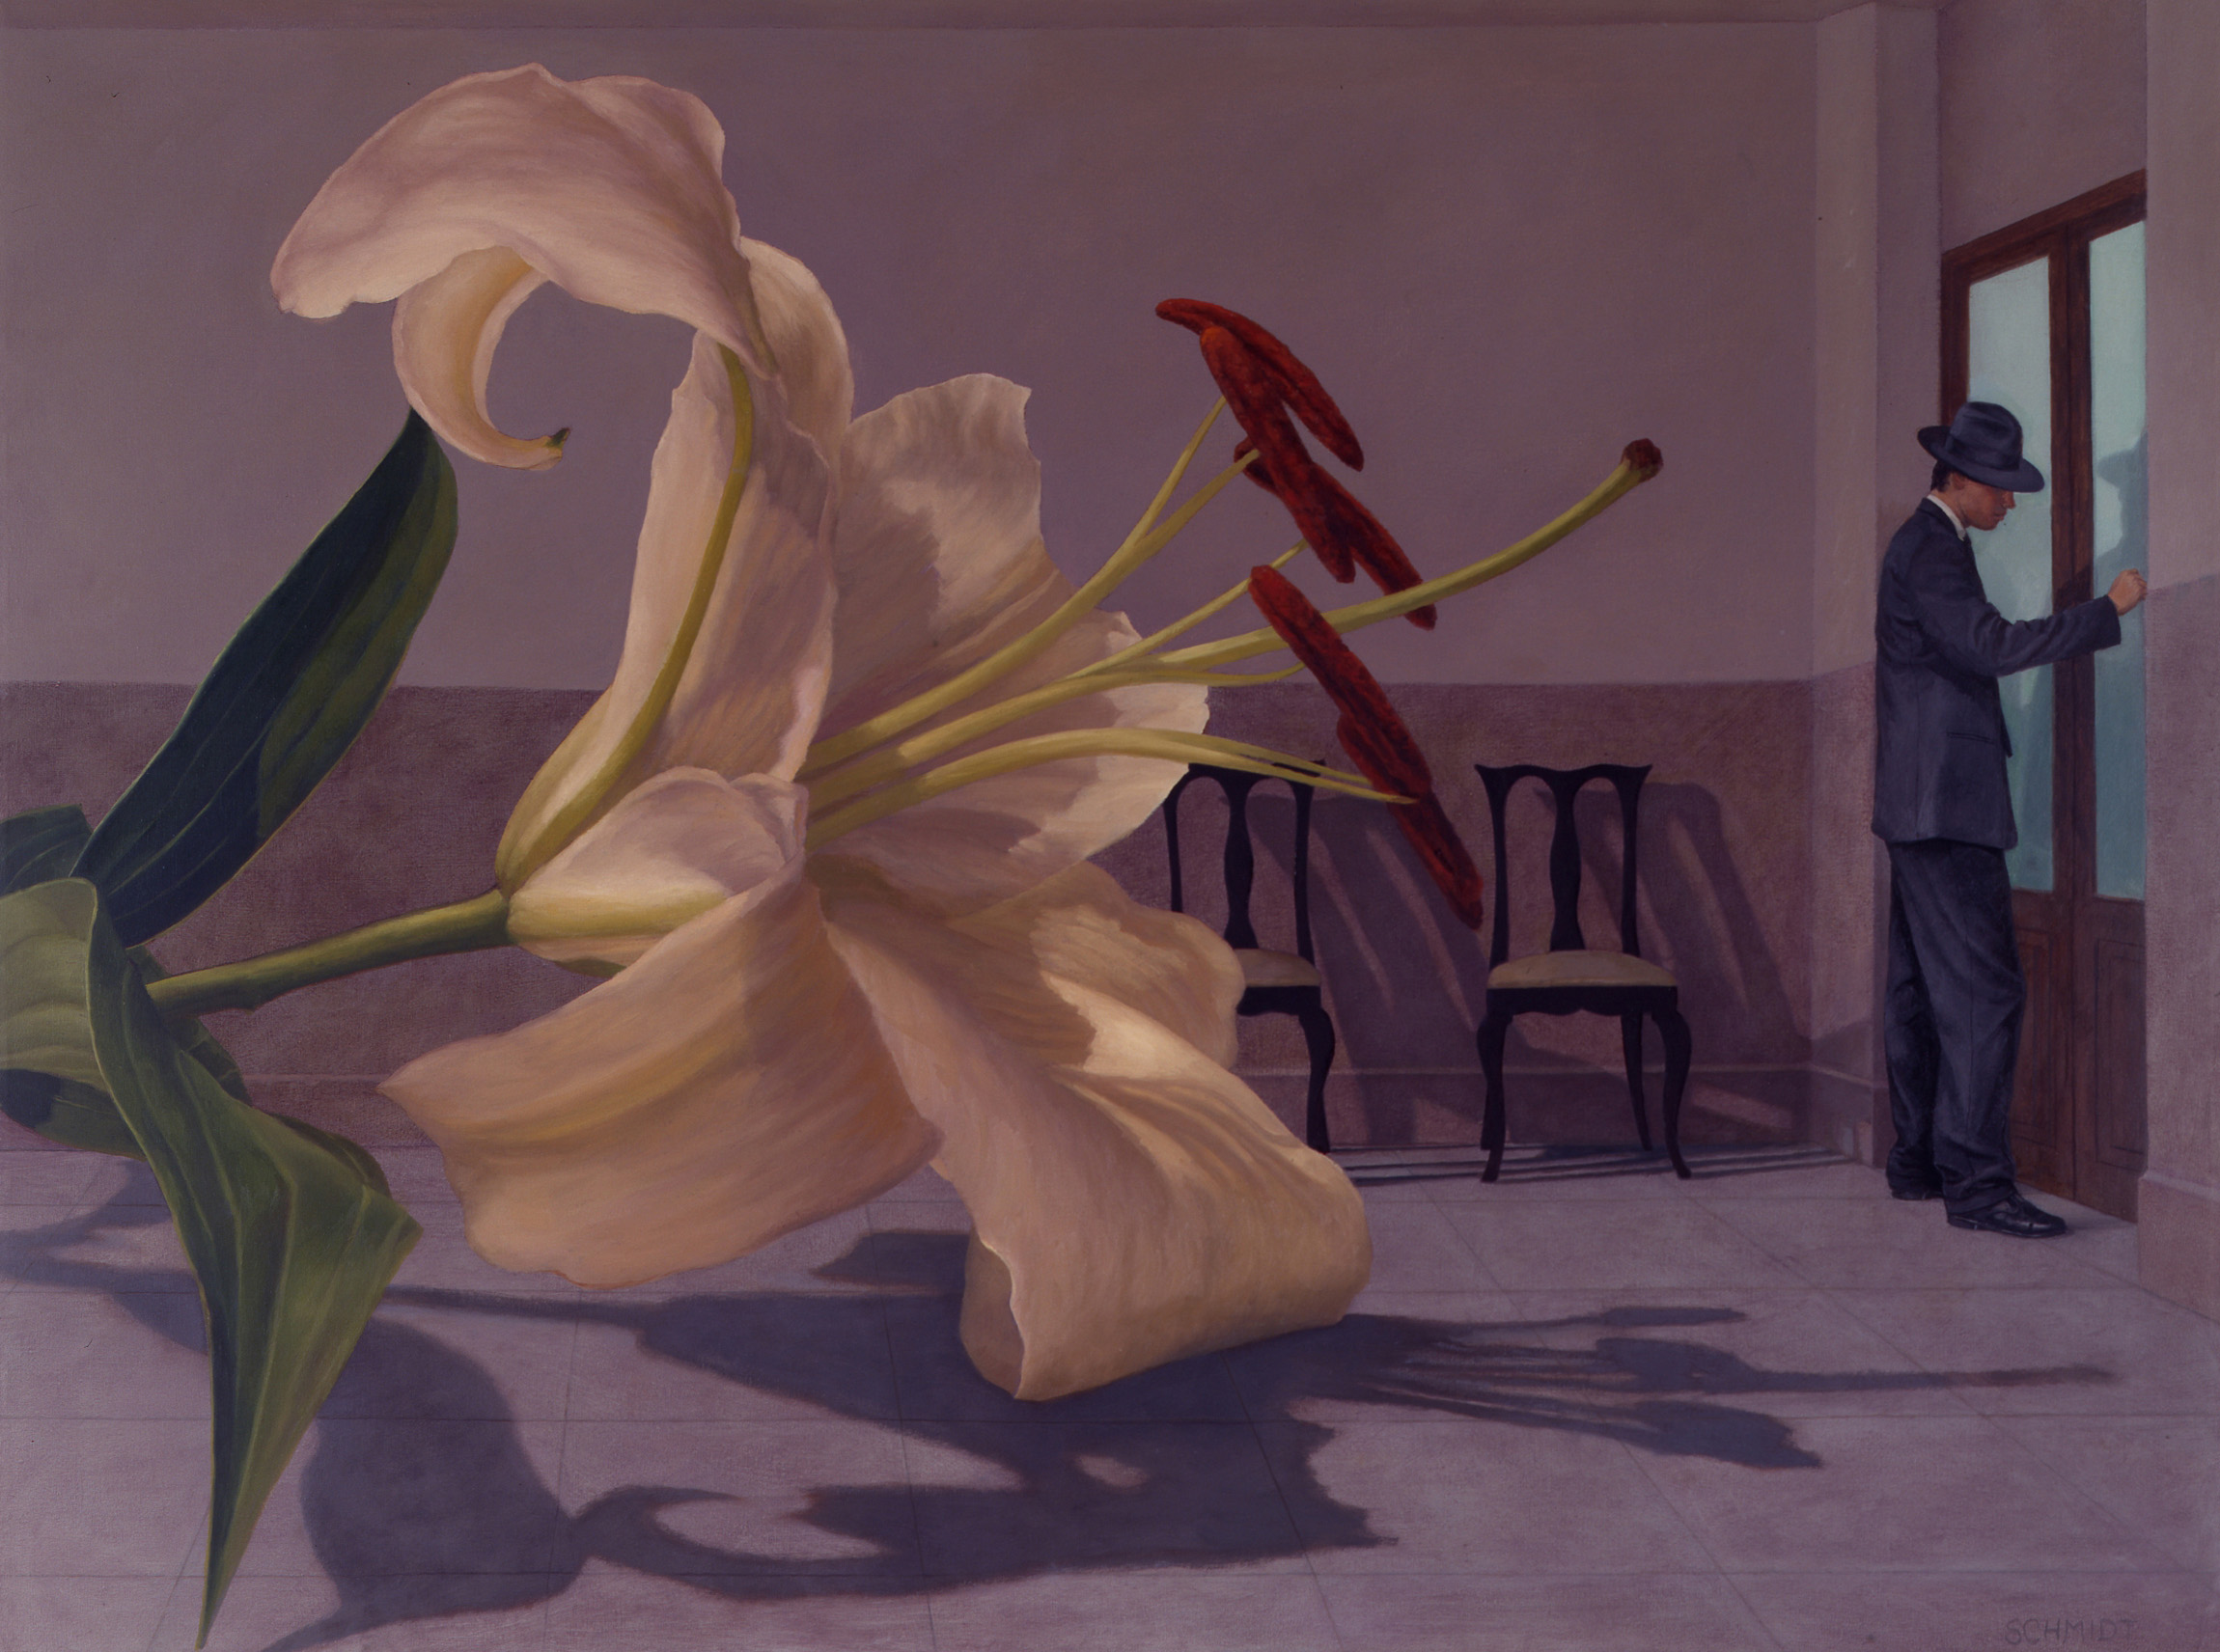 giant casablanca flower, diminutive male figure wearing suit and fedora hat, knocking on a door